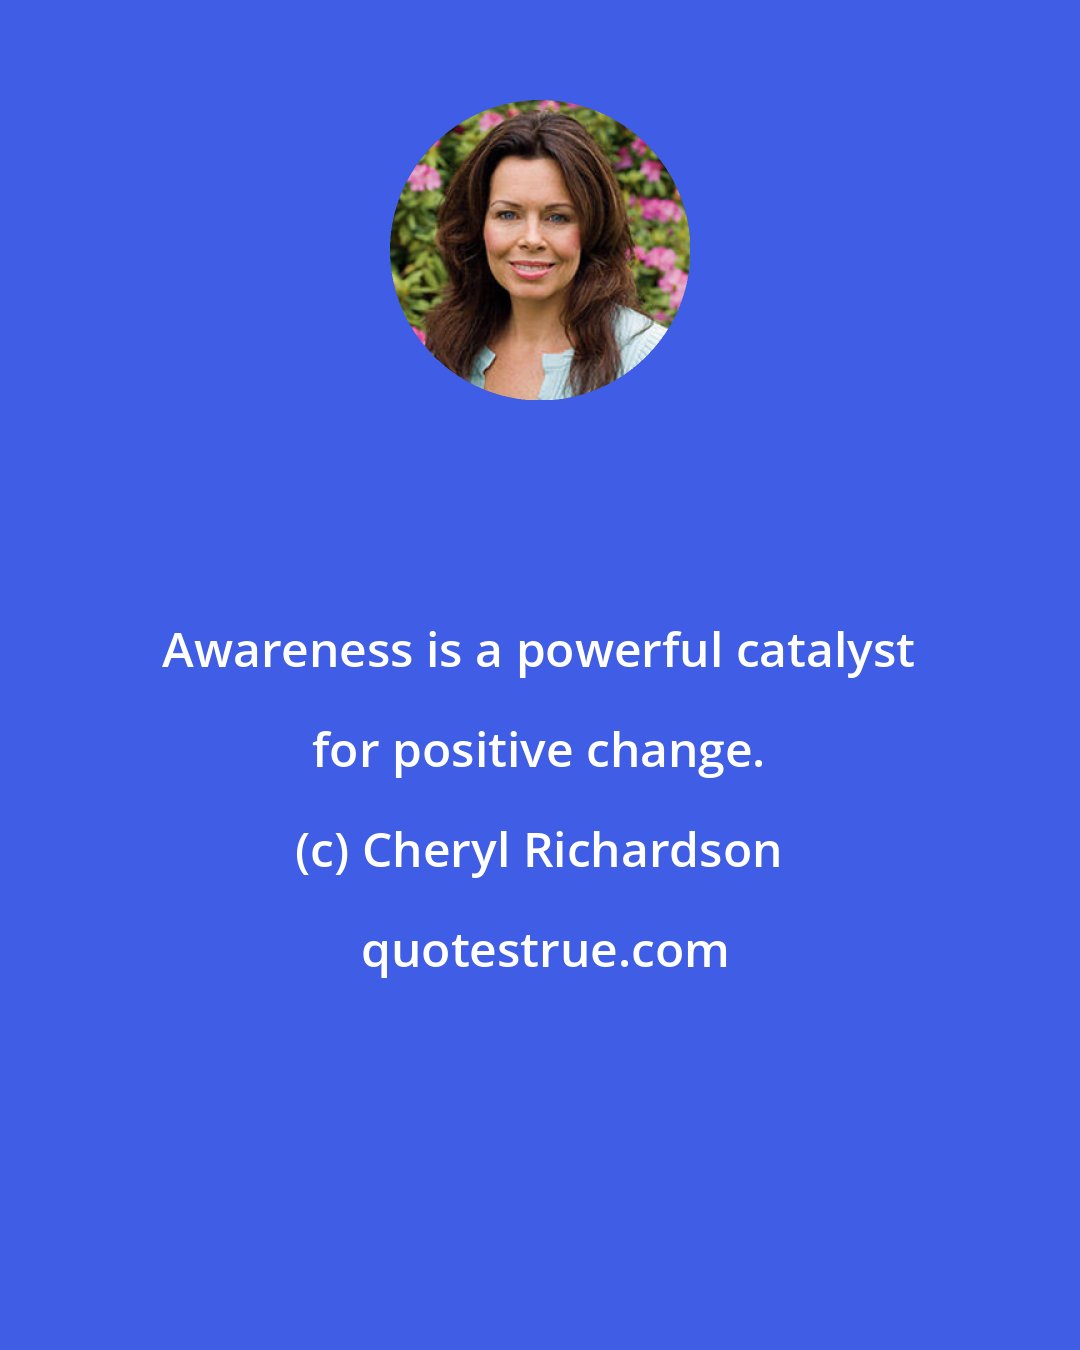 Cheryl Richardson: Awareness is a powerful catalyst for positive change.